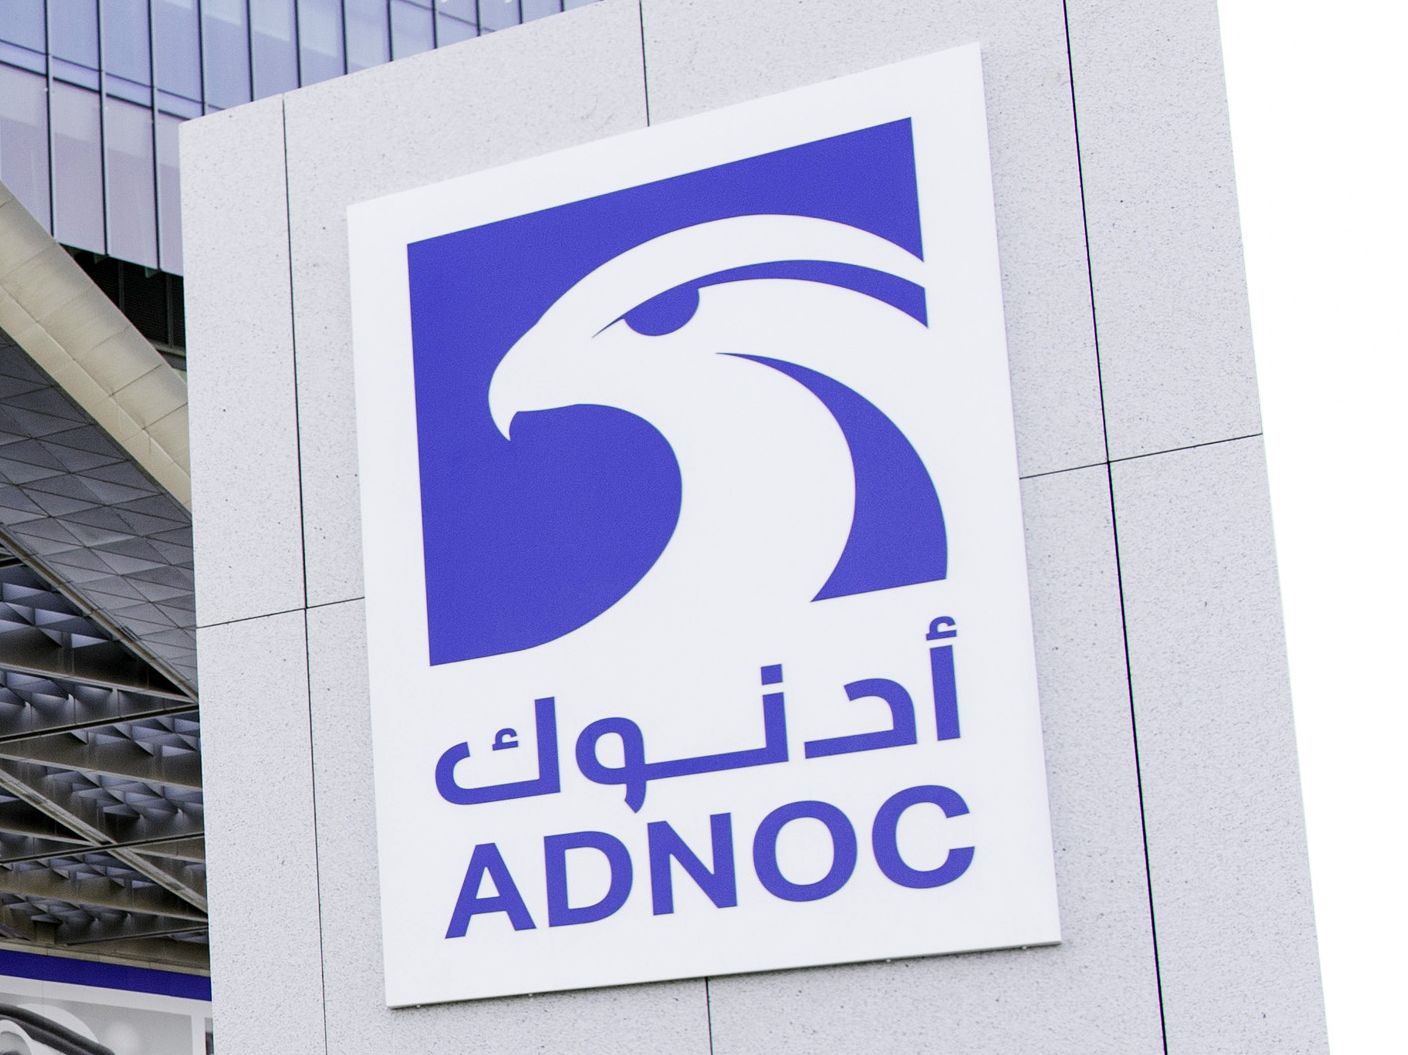 Abu dhabi national oil company ipo descriptions of indicators for forex